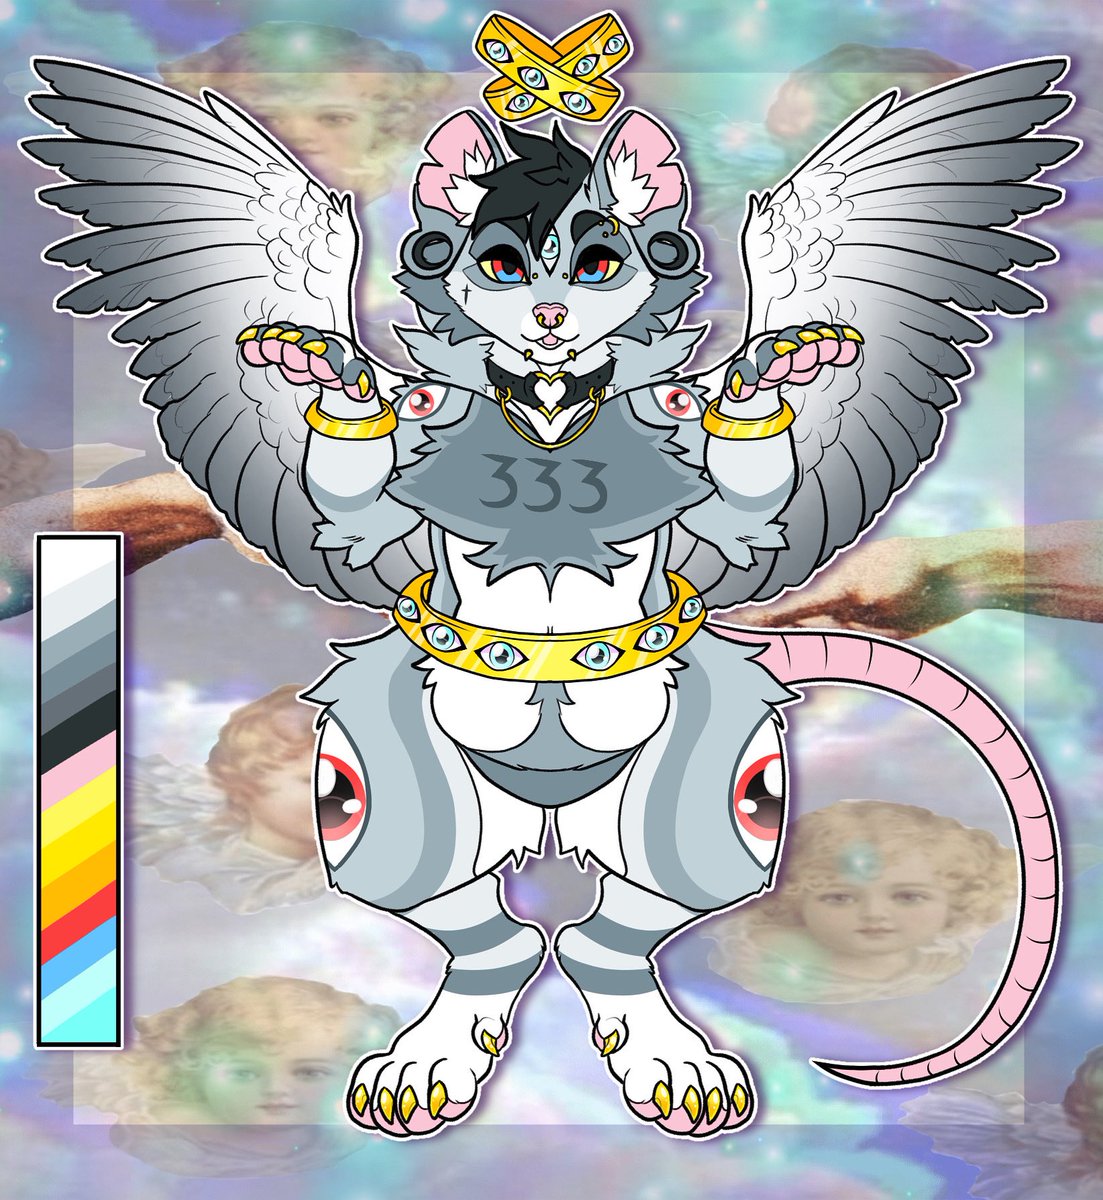 🕊🧿Biblically accurate angel rat 🧿🕊

Custom comm for a user on IG! Base is by Honeybeest, edits/design by me! 

#biblicallyaccurateangel #angelcore #dreamcore #webcore #liminal #ratoc #ratfurry #customcommission #customoc #furryart #furryartist #furrycommissions